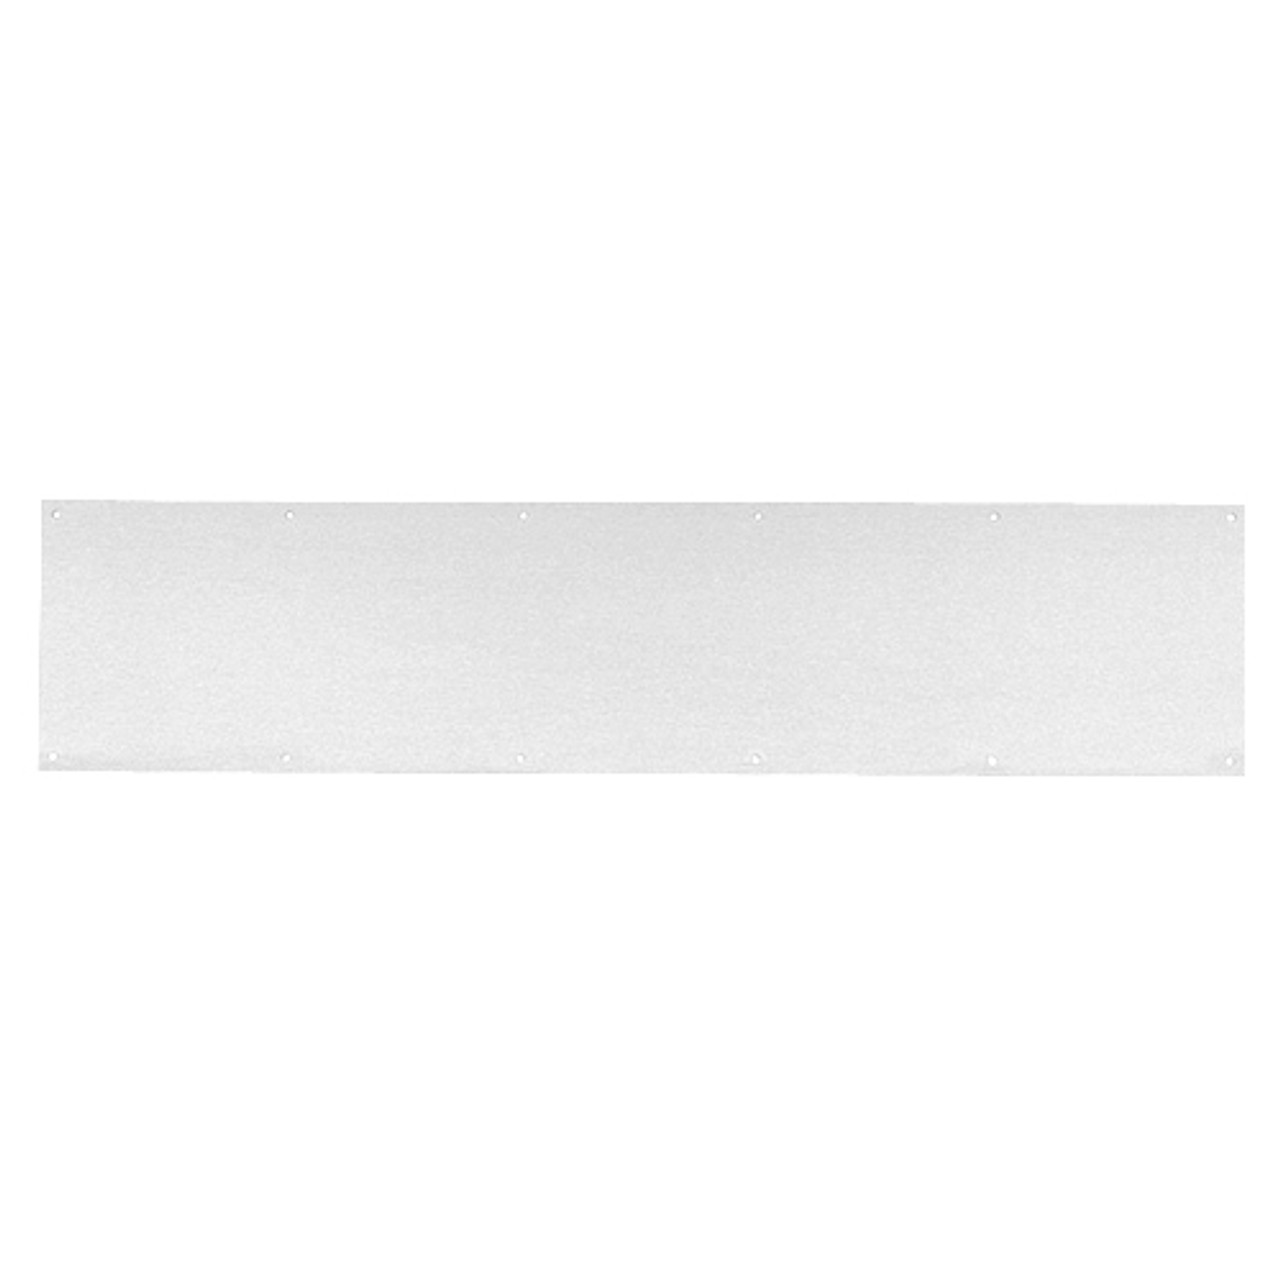 8400-US28-35x42-B-CS Ives 8400 Series Protection Plate in Aluminum